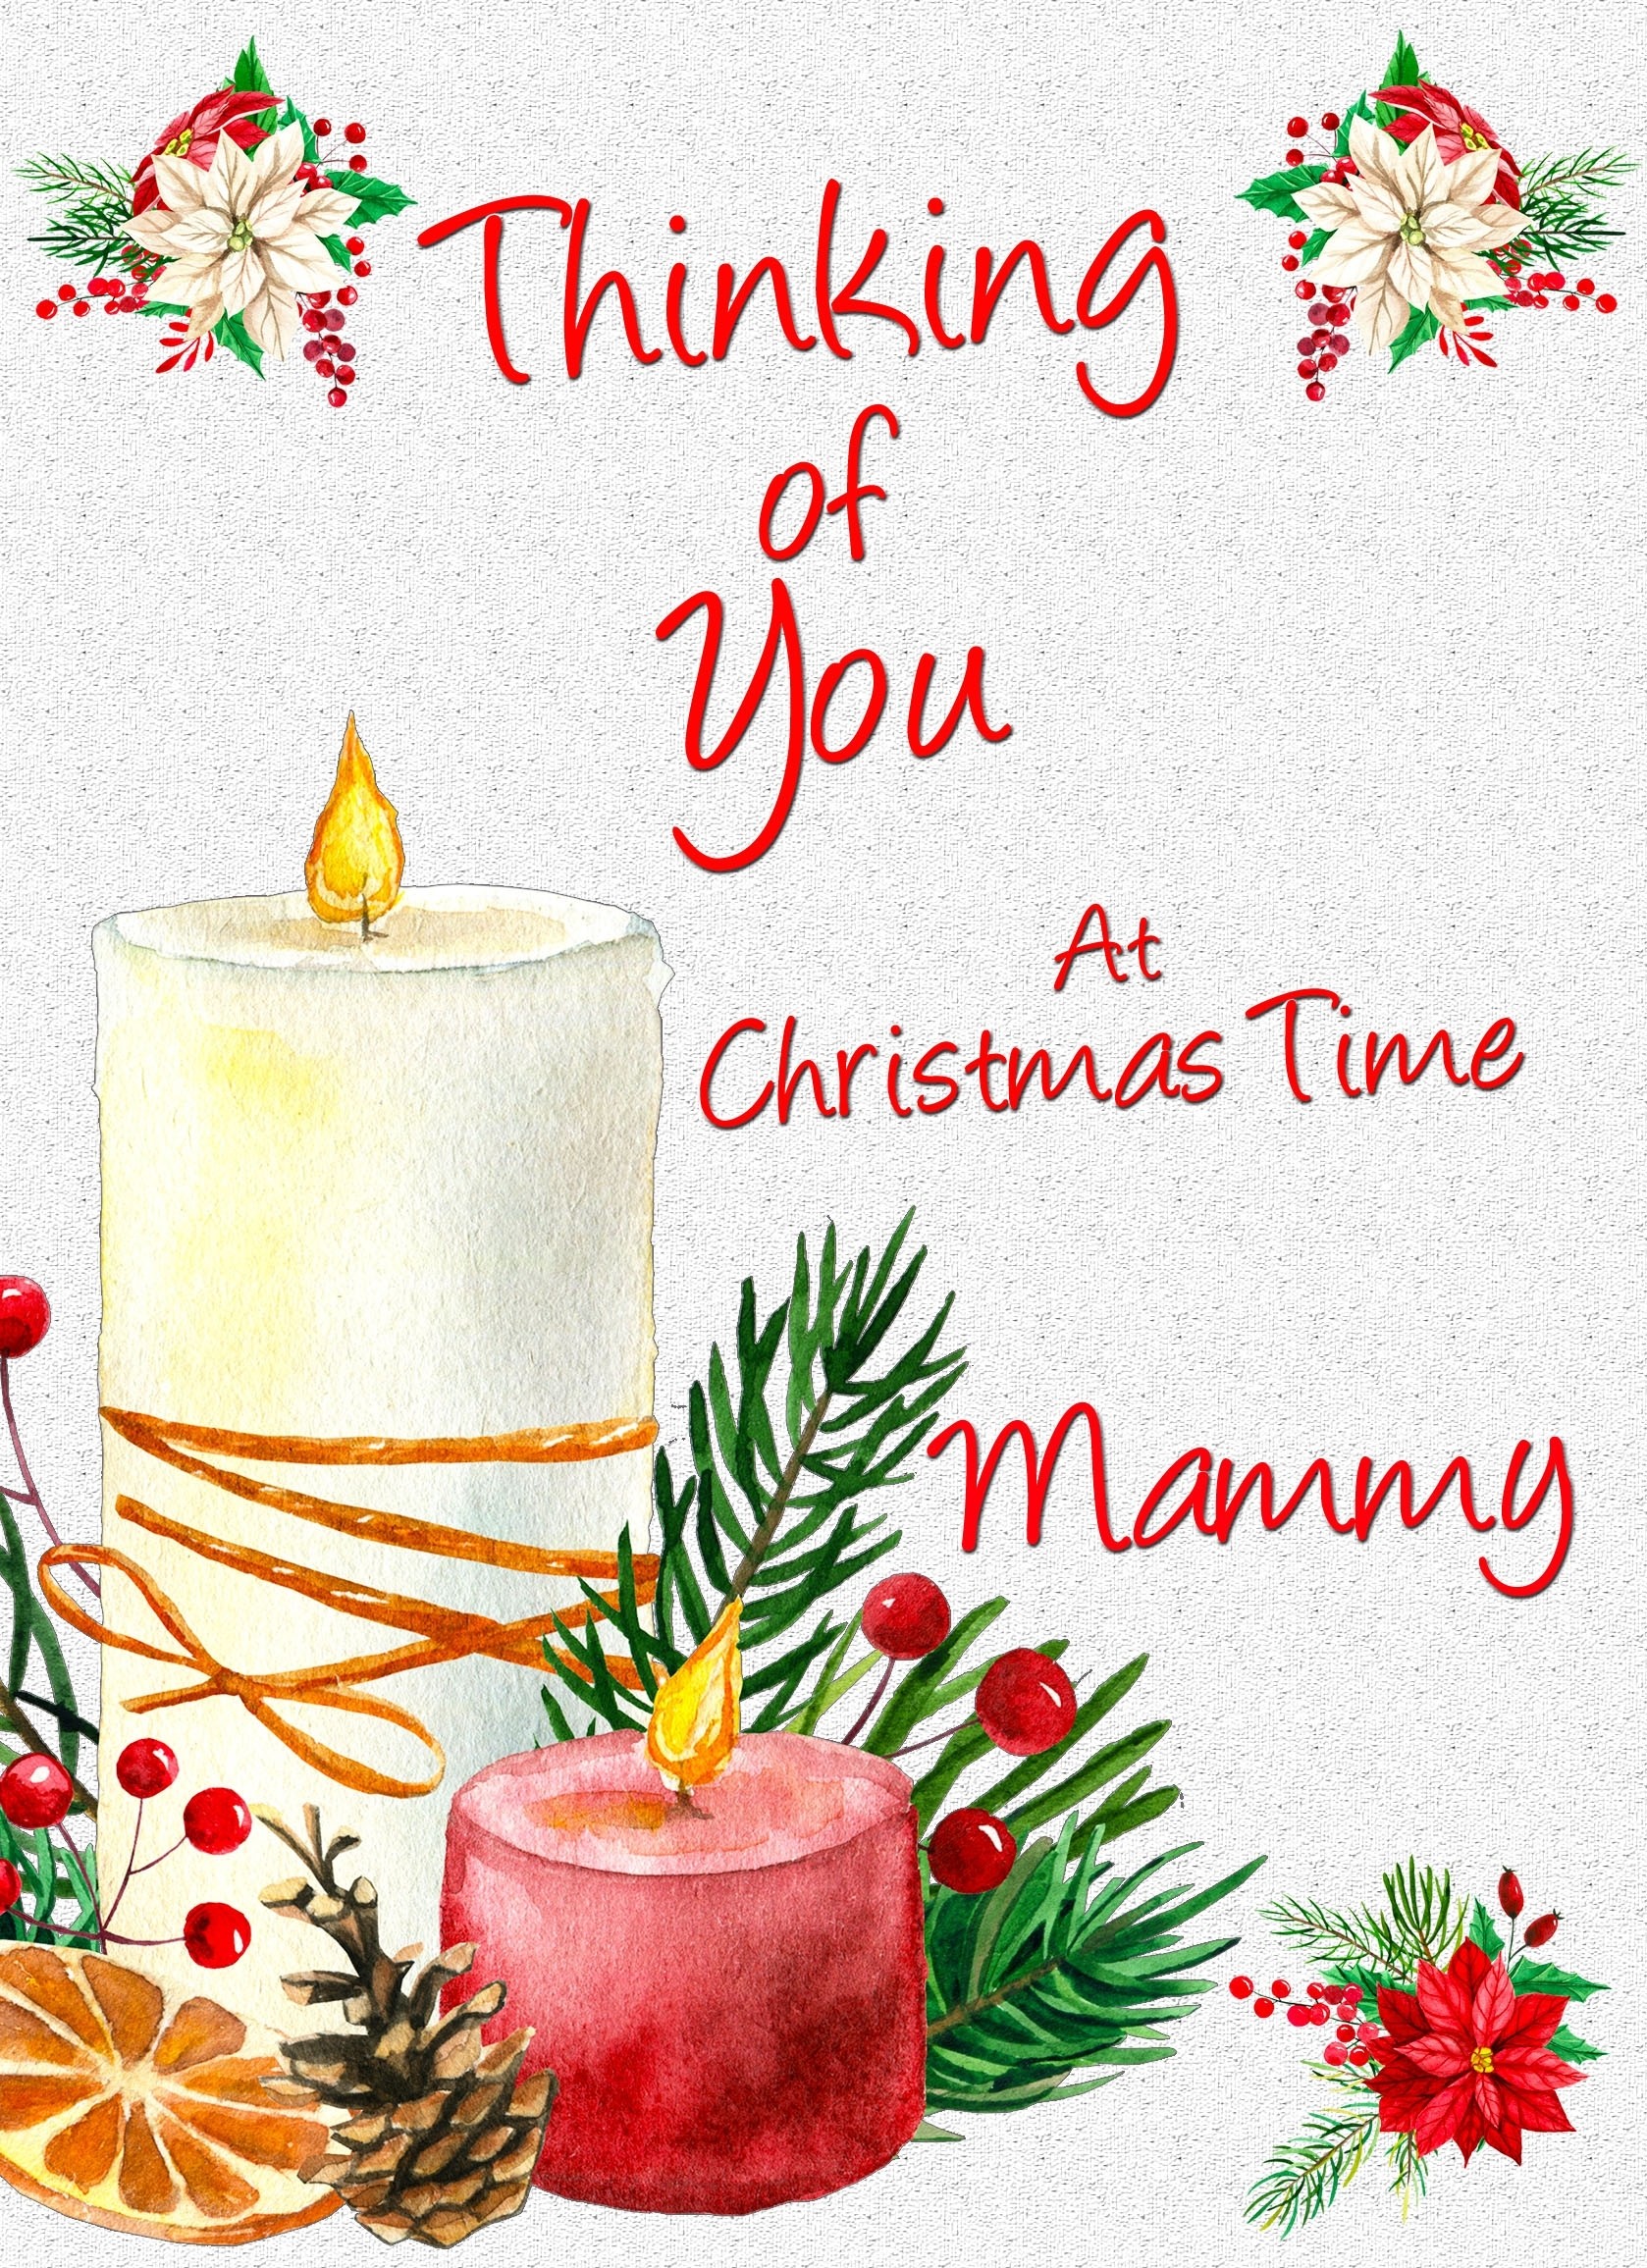 Thinking of You at Christmas Card For Mammy (Candle)